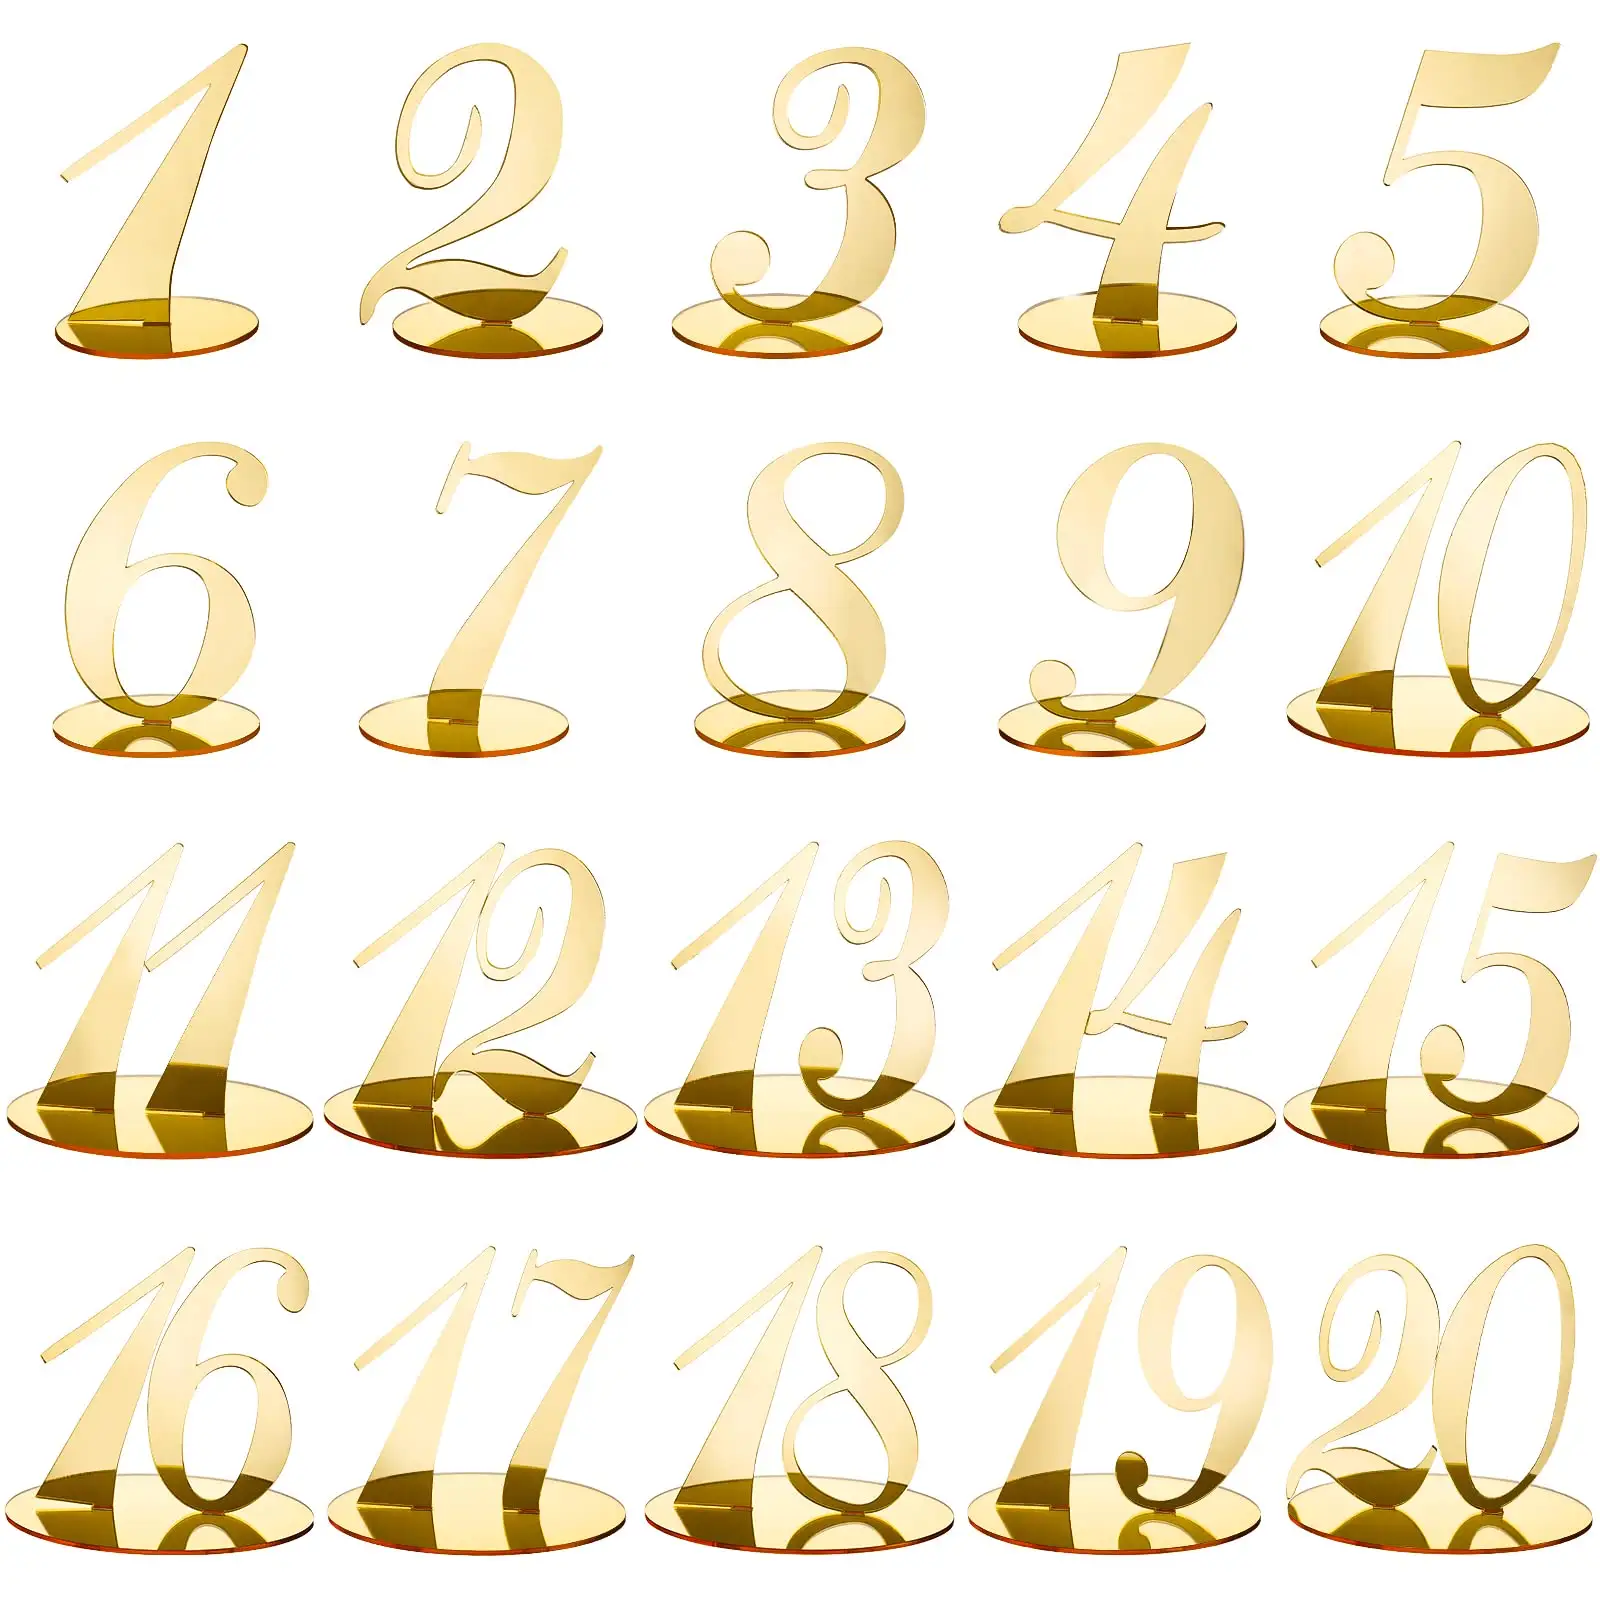 Luxury Gold Table Numbers DIY 0-20 Table Sign Seat Card Wedding Birthday Acrylic Table Numbers For Wedding Reception Party